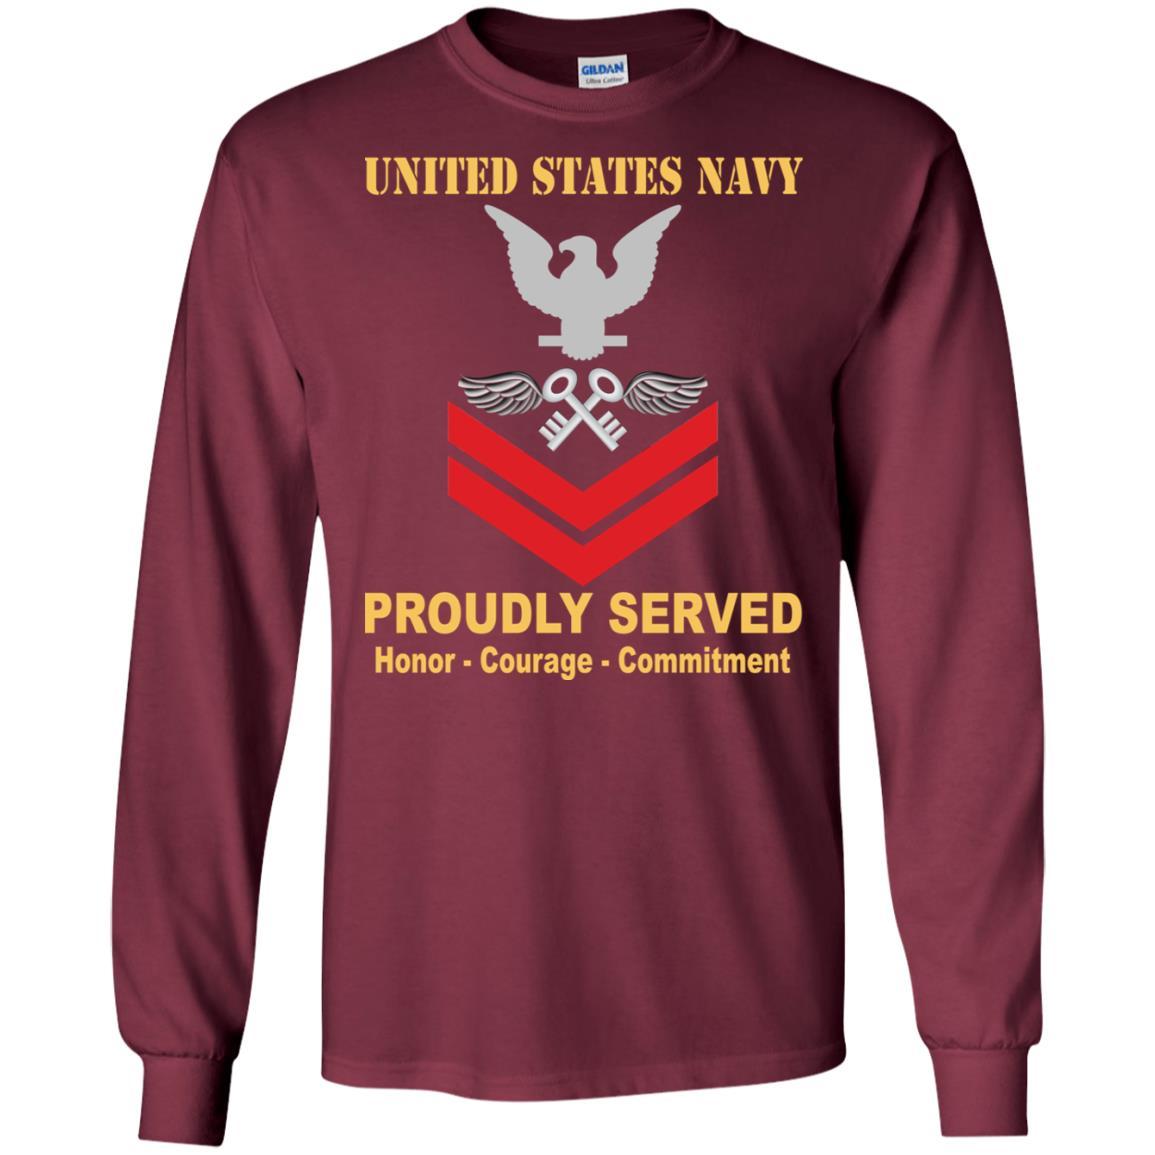 Navy Aviation Storekeeper Navy AK E-5 Rating Badges Proudly Served T-Shirt For Men On Front-TShirt-Navy-Veterans Nation